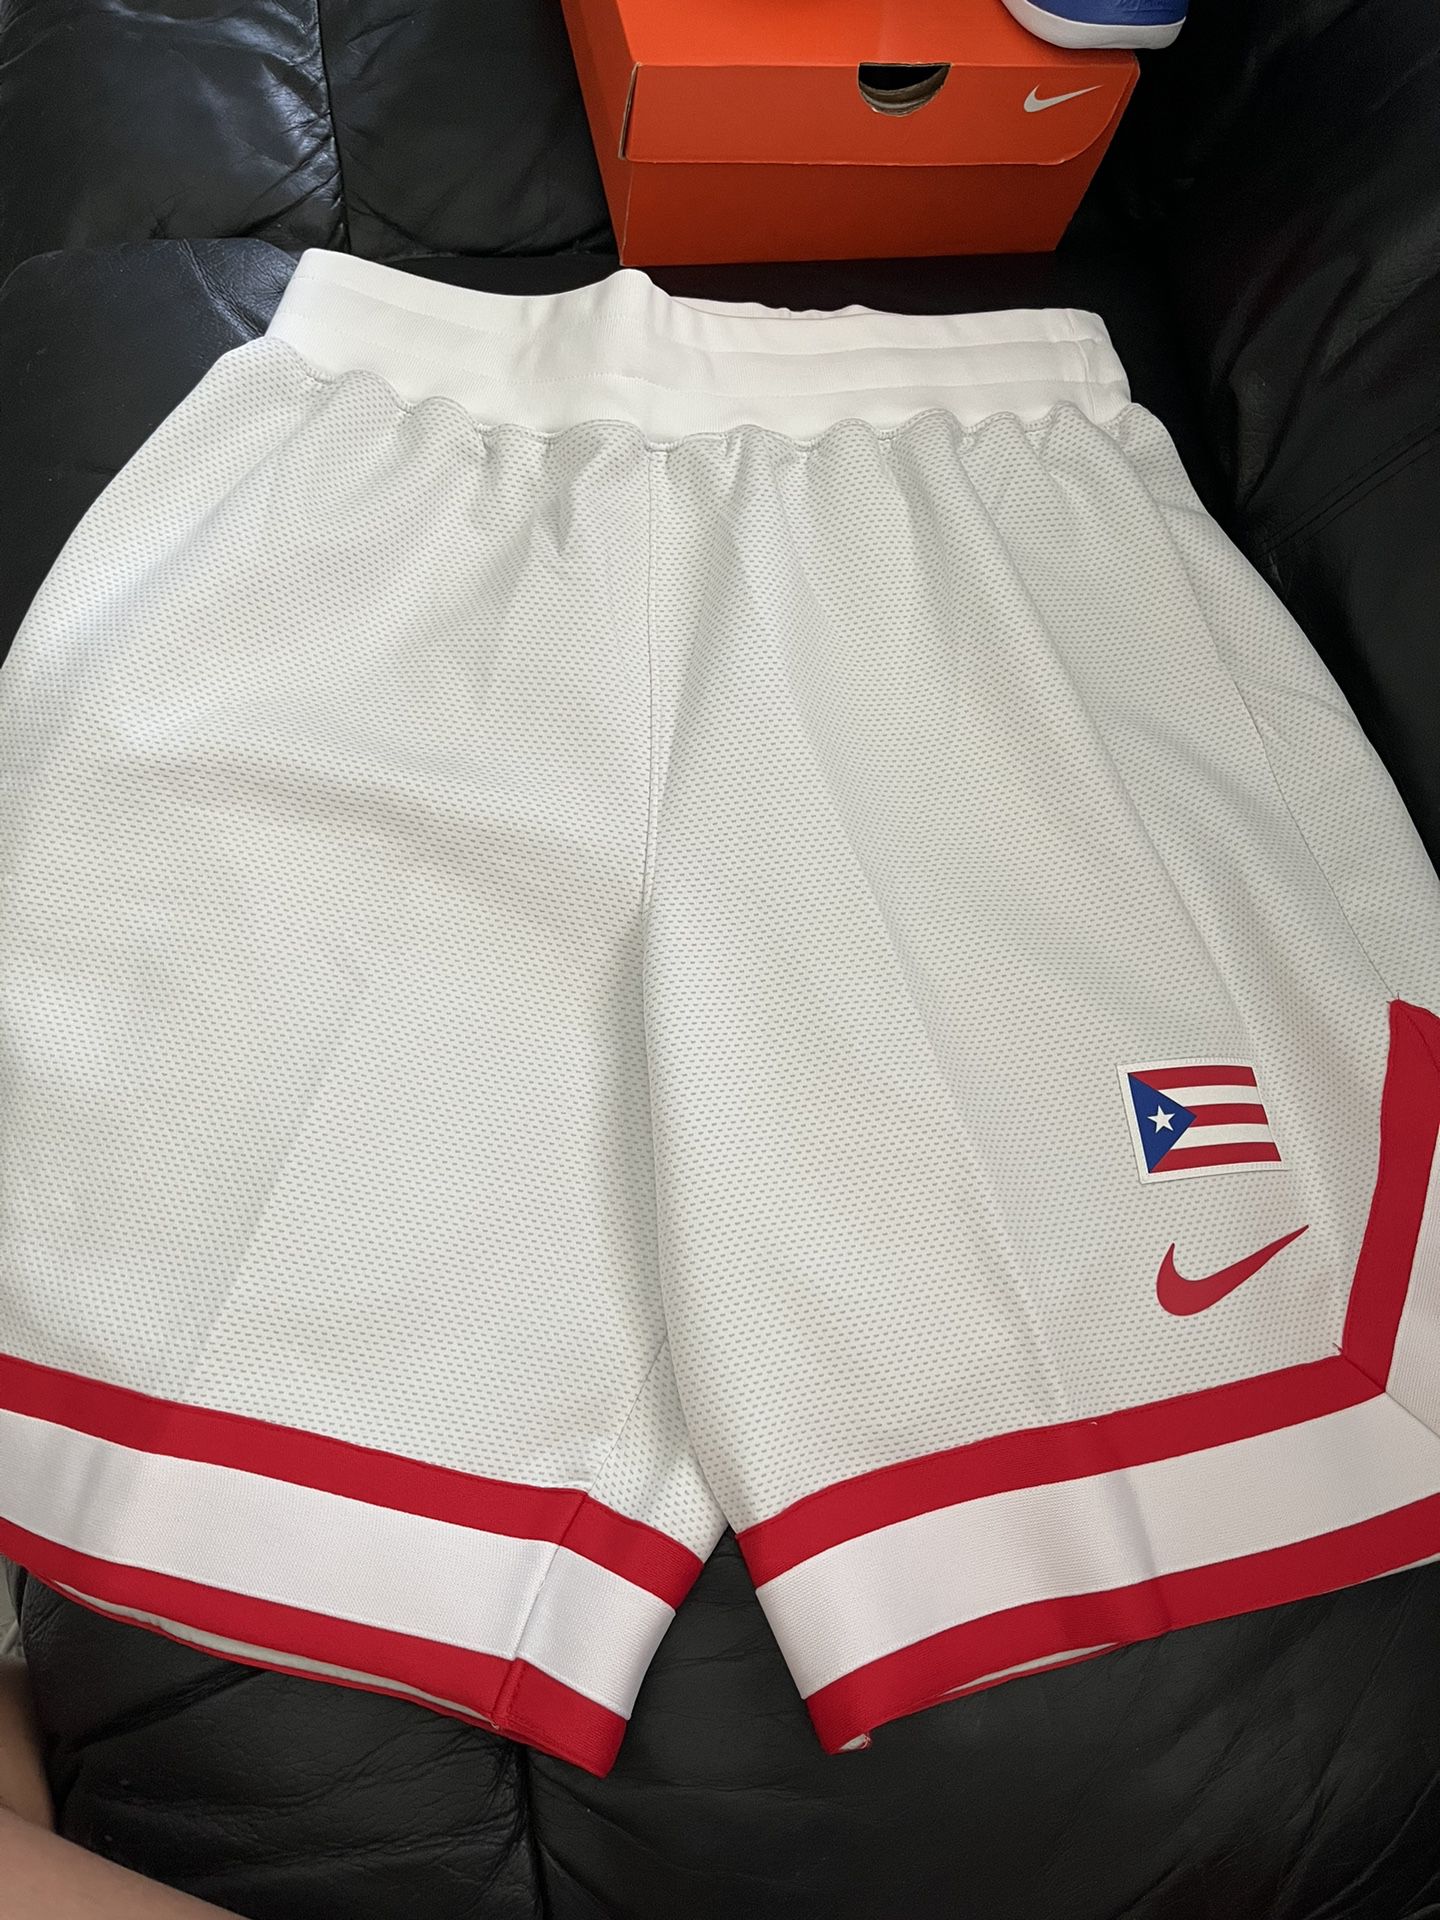 Nike Basketball Shorts for Sale in Jacinto City, TX - OfferUp